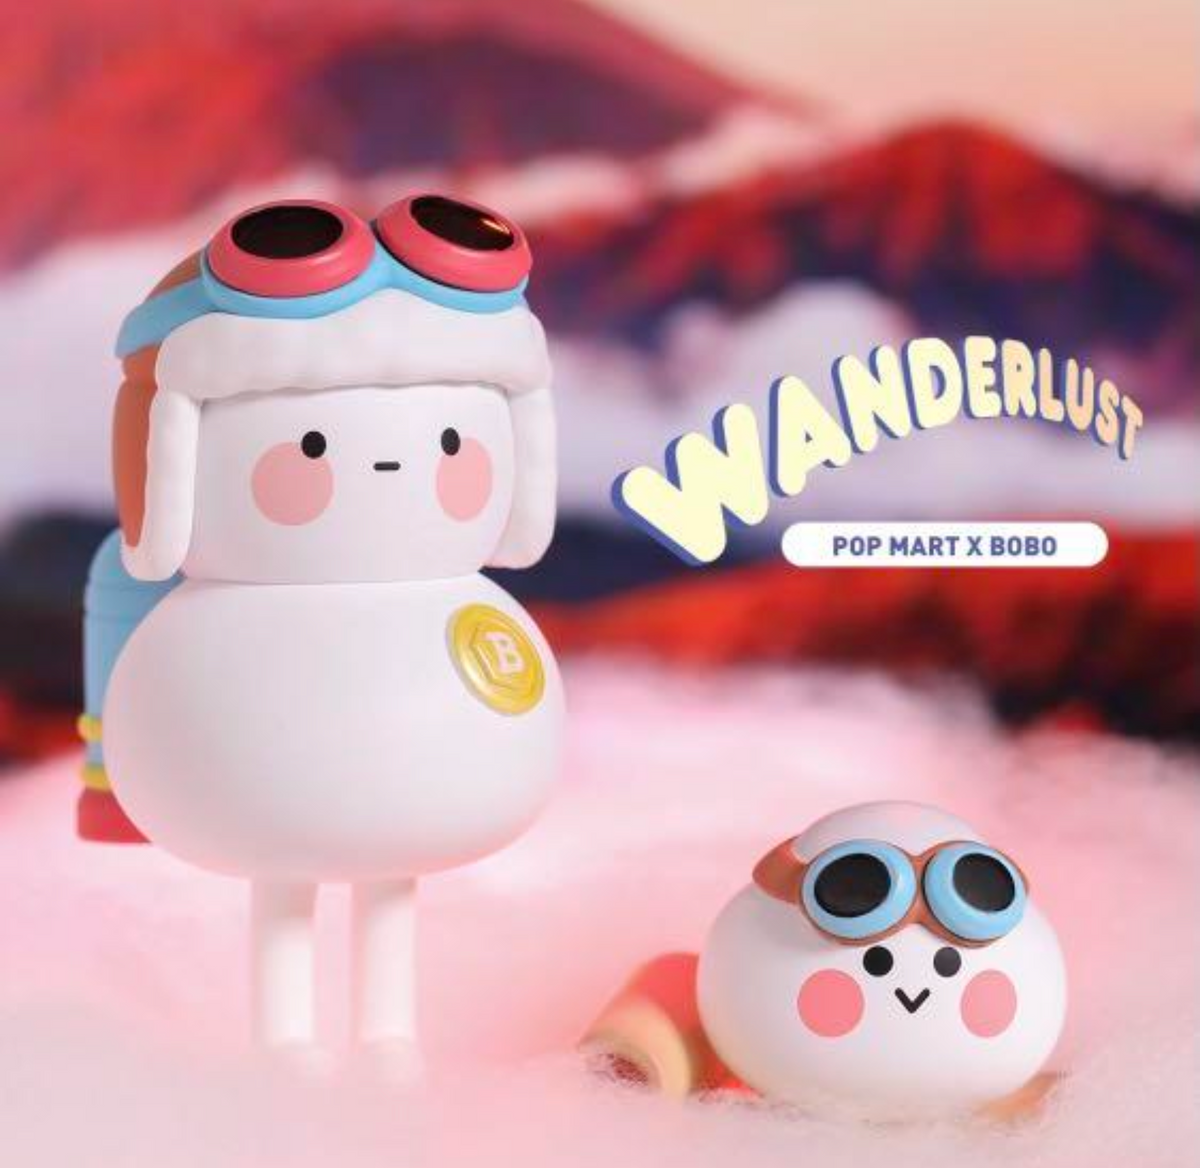 Sky - Bobo and Coco Wanderlust by POP MART